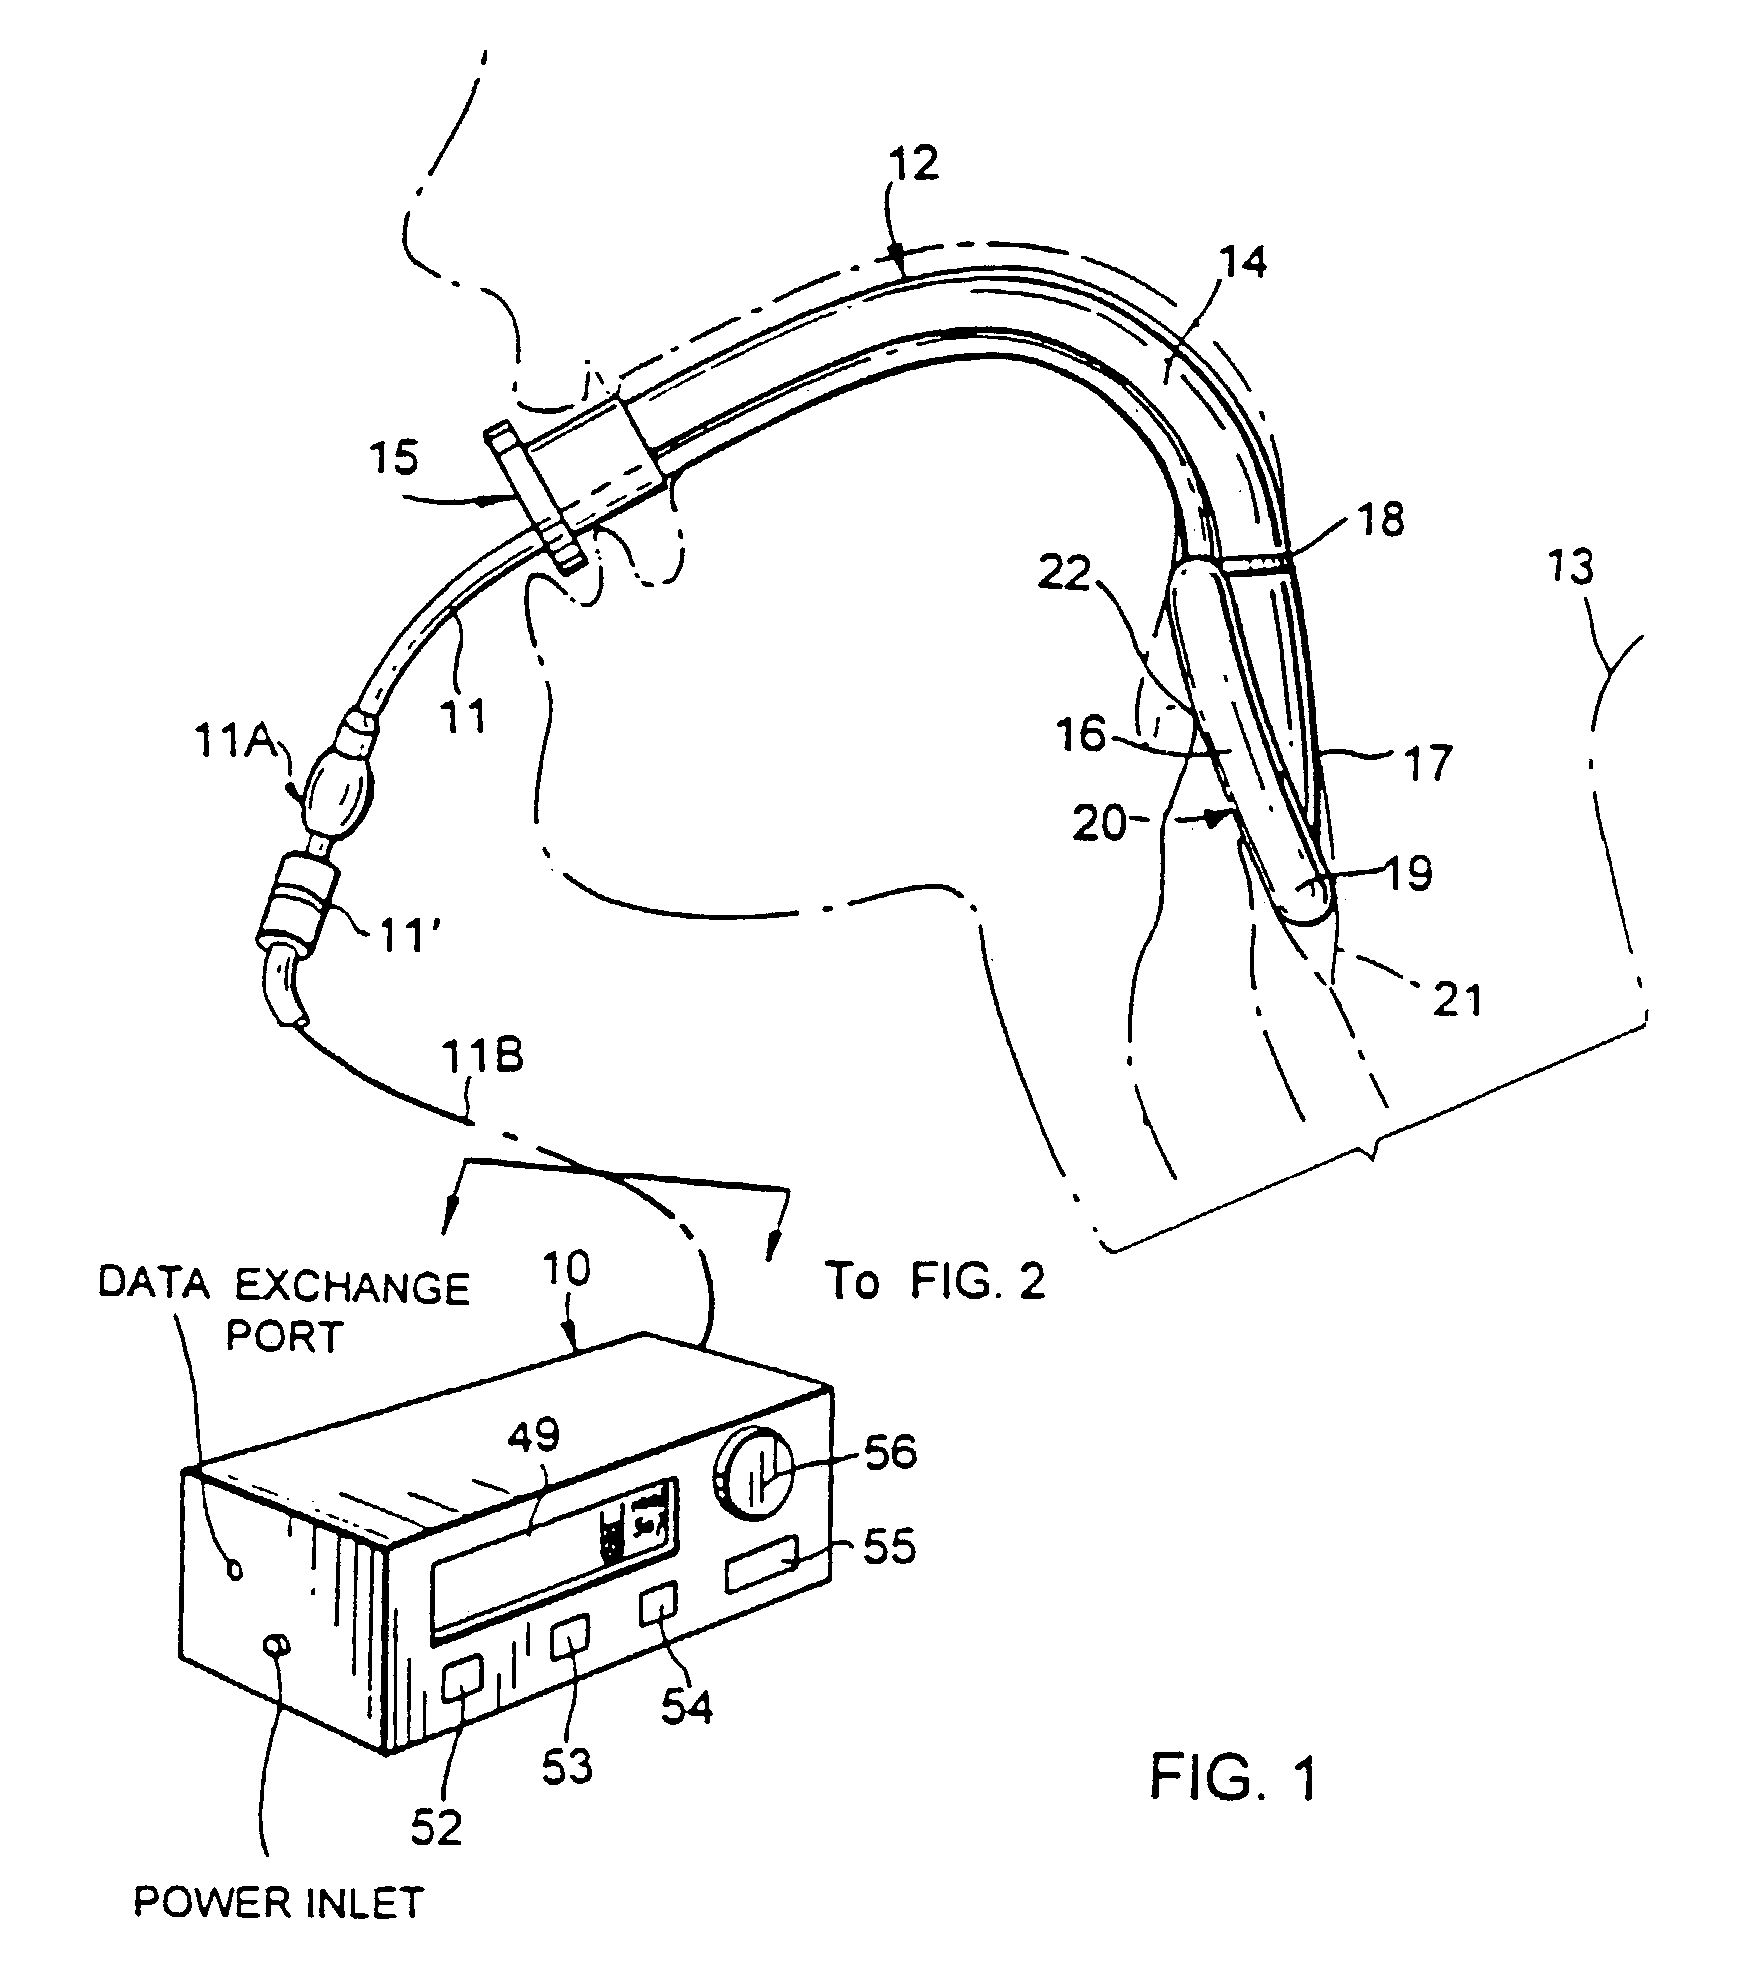 Monitoring and control for a laryngeal mask airway device